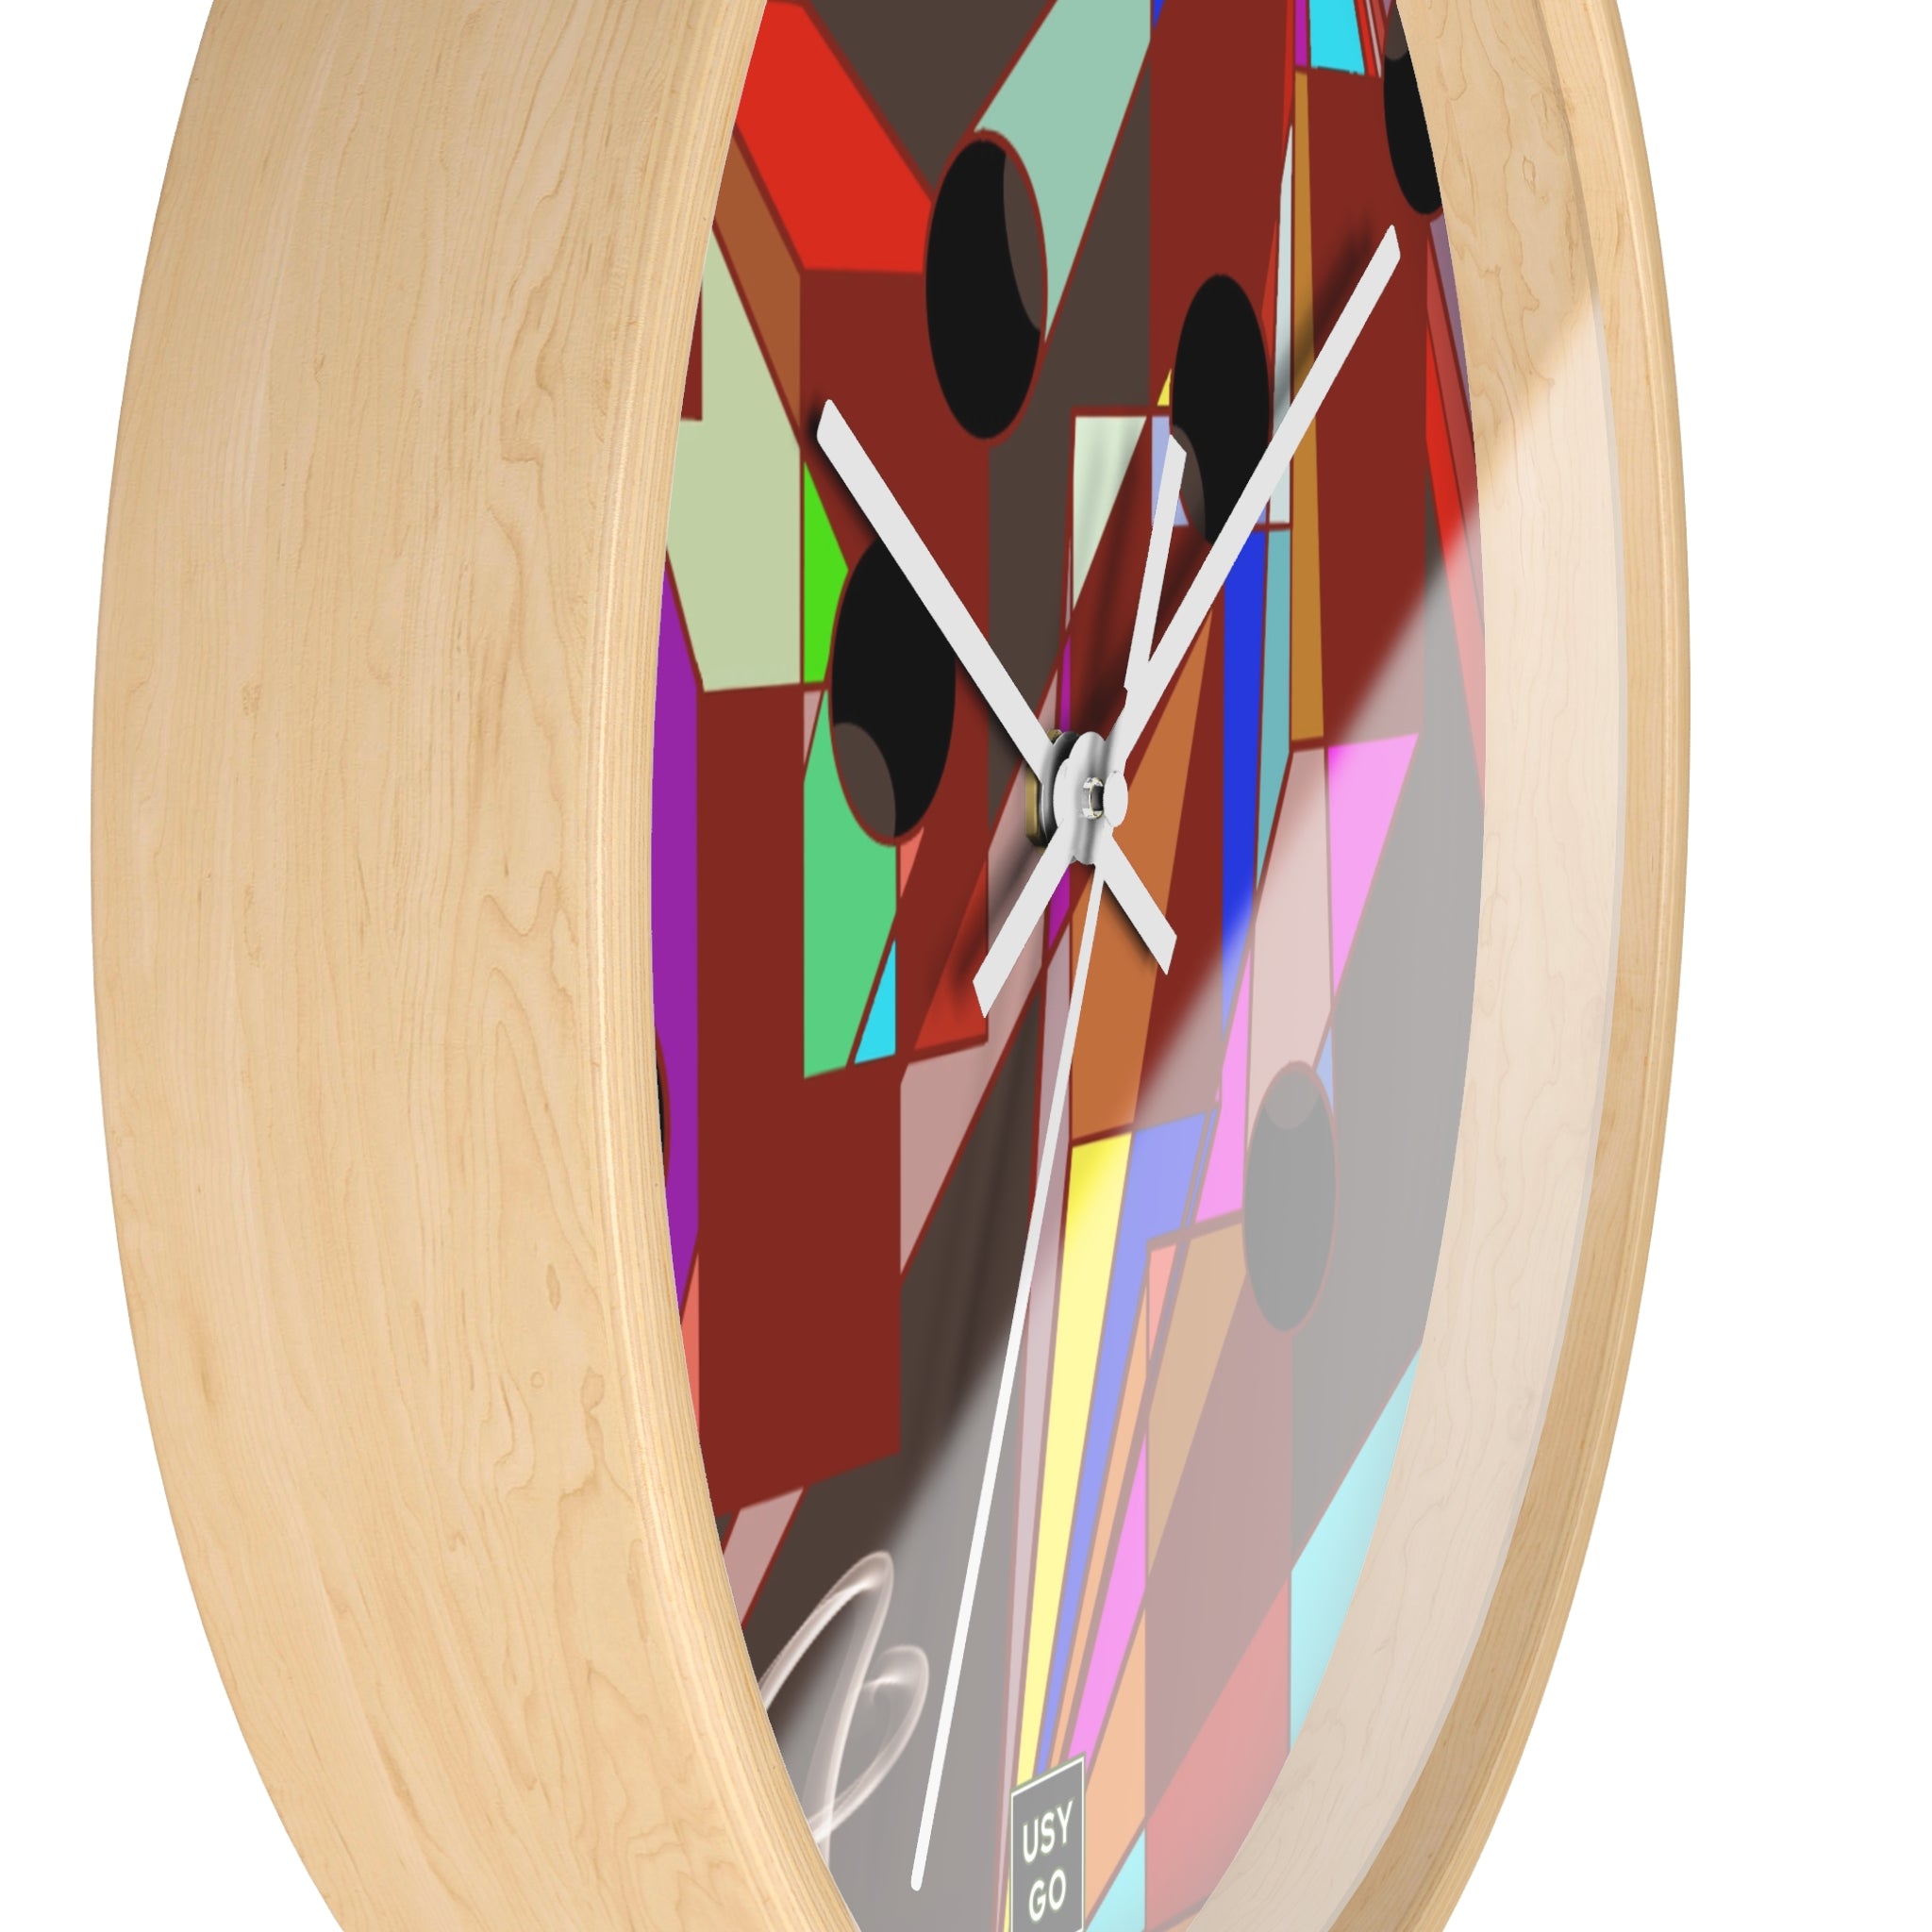 Ambient Wall Clock by @johnnygraff31